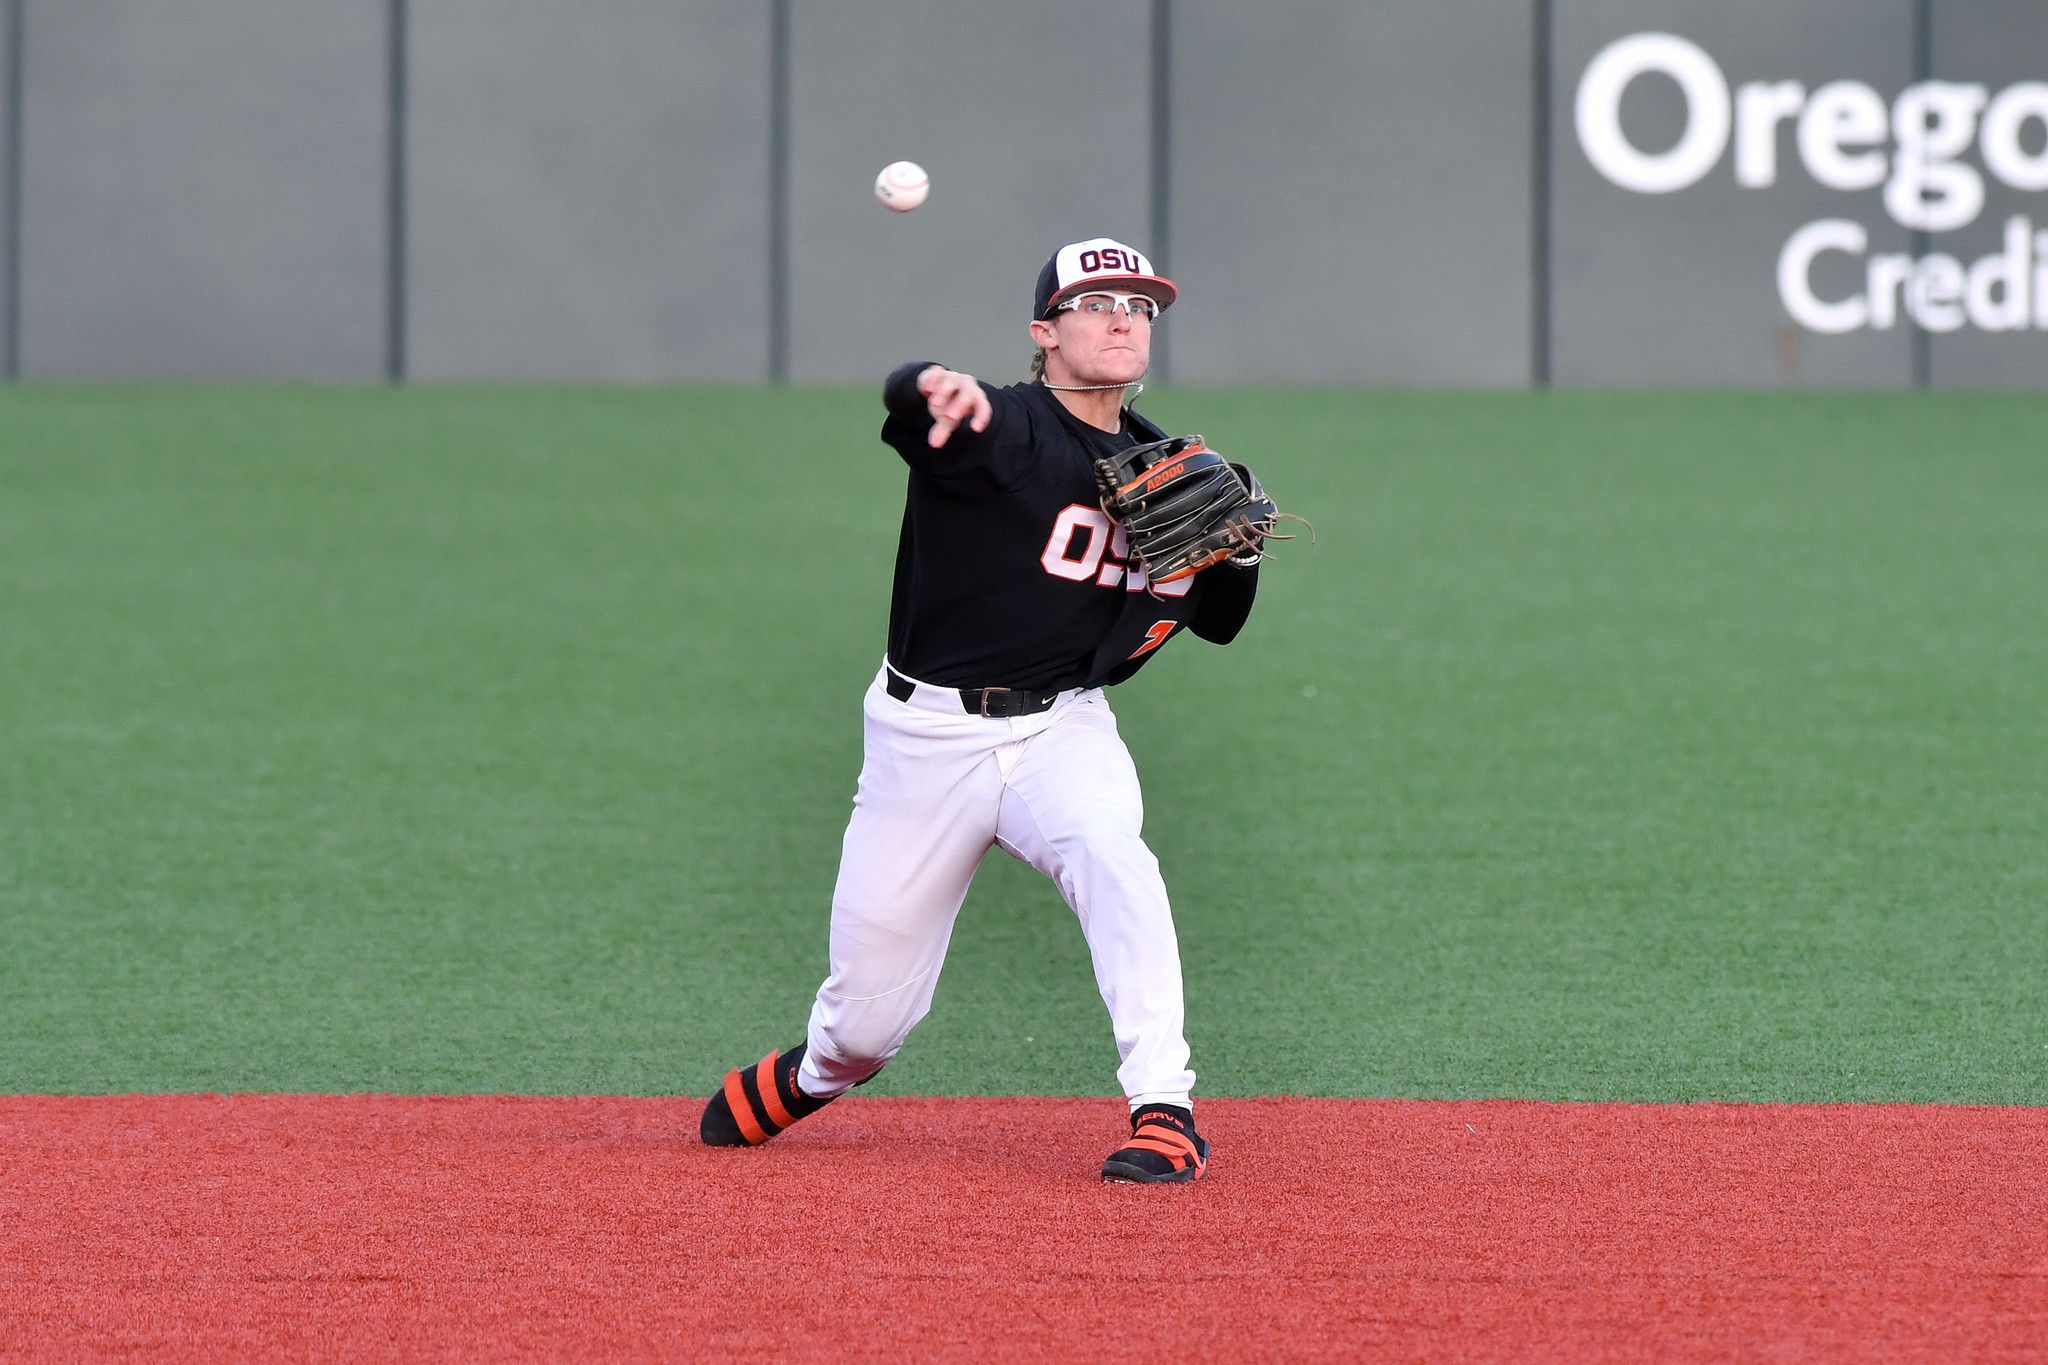 Oregon State catcher Adley Rutschman developing into two-way force 